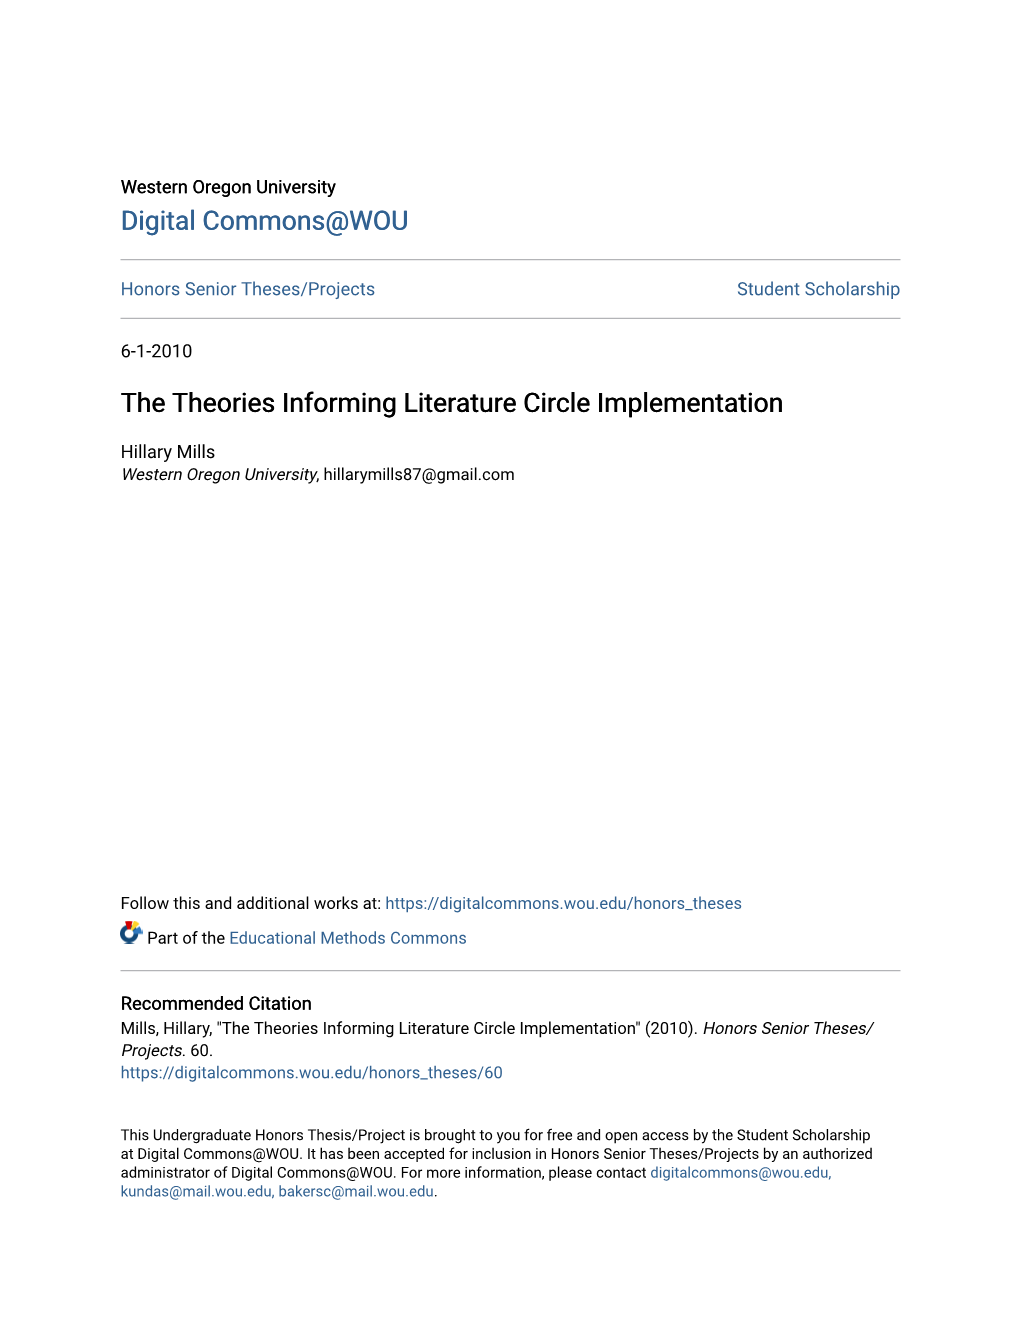 The Theories Informing Literature Circle Implementation